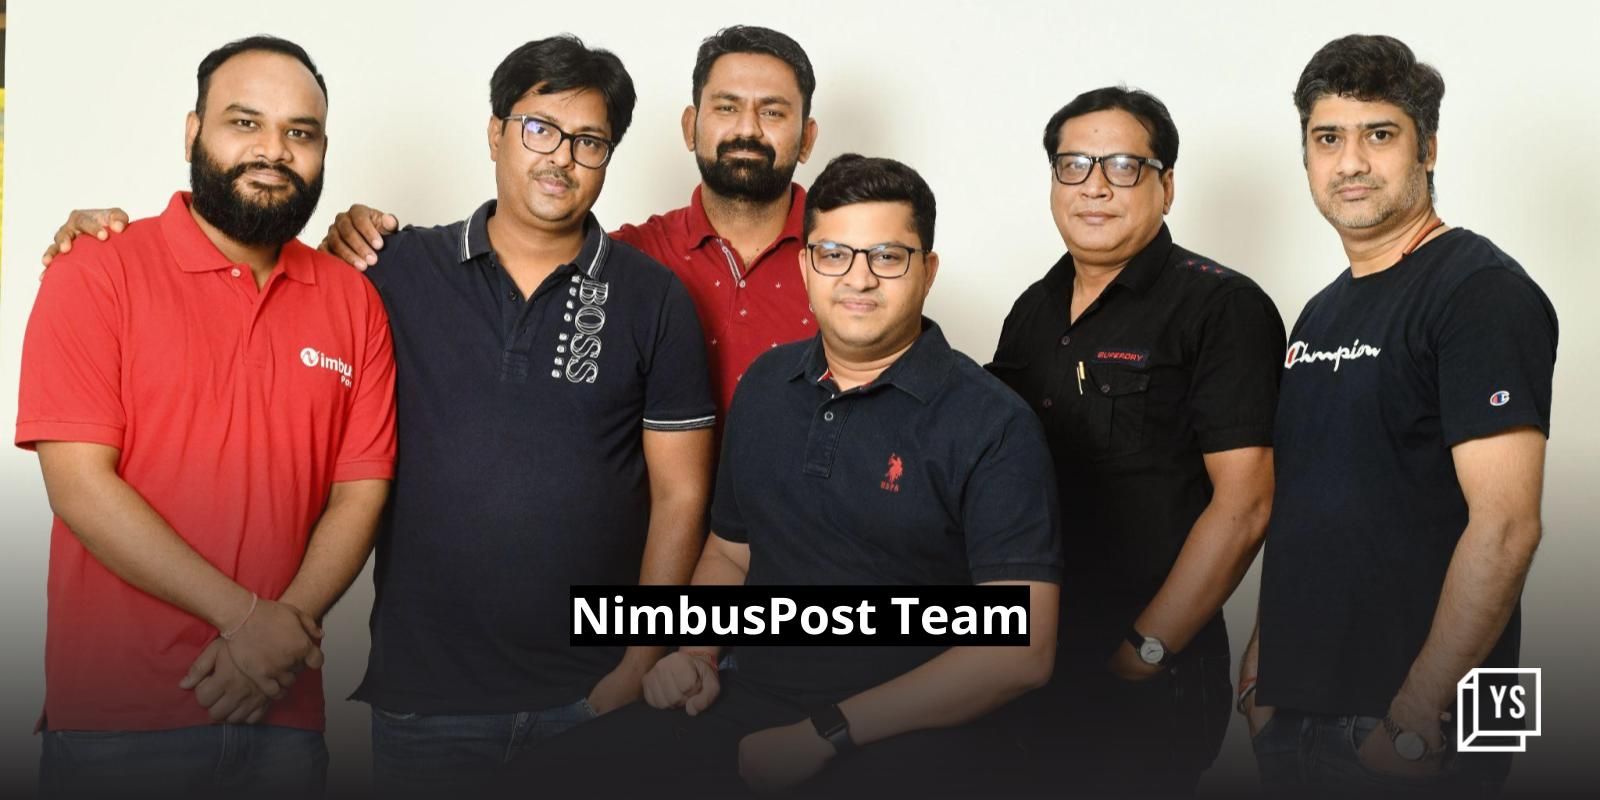 NimbusPost’s tech platform helps sellers pick the best courier for each shipment